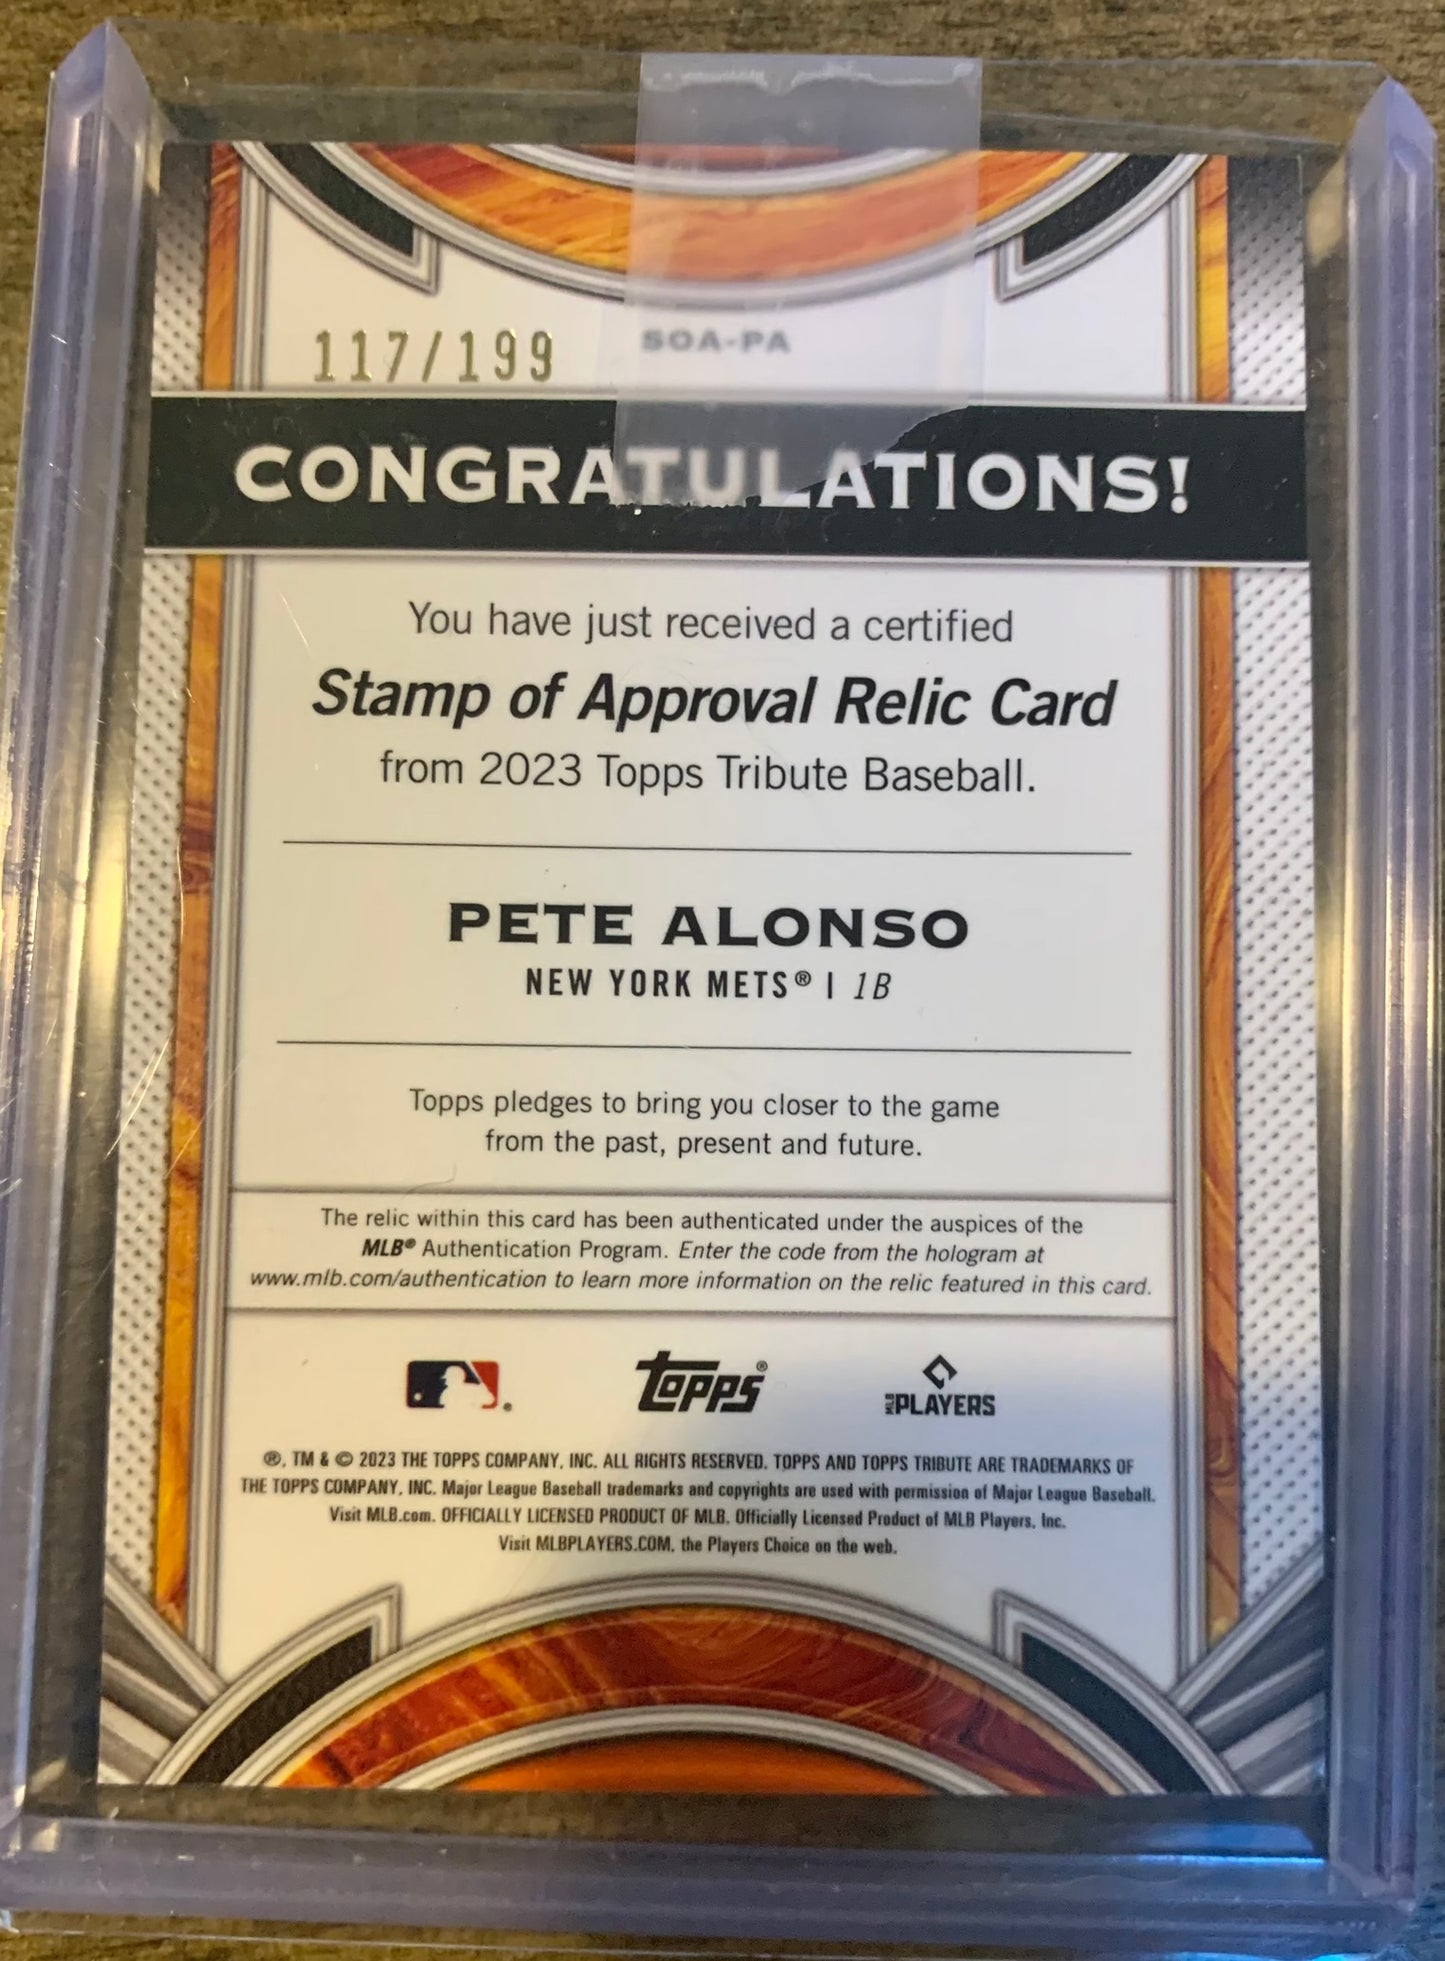 Pete Alonso - Topps - #BOA-PA - Memo Serial Numbered /199